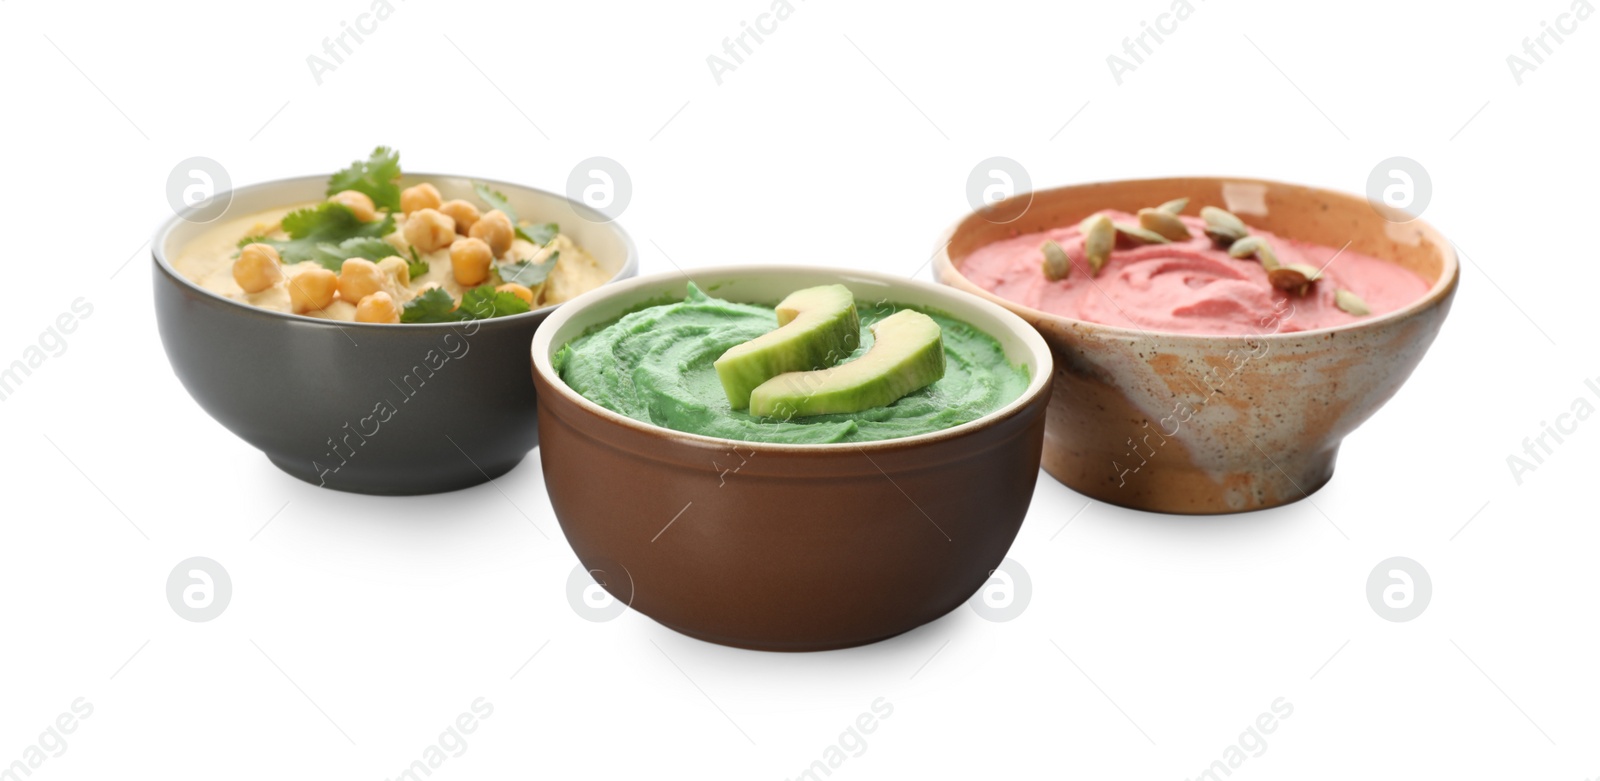 Photo of Different kinds of tasty hummus in bowls on white background